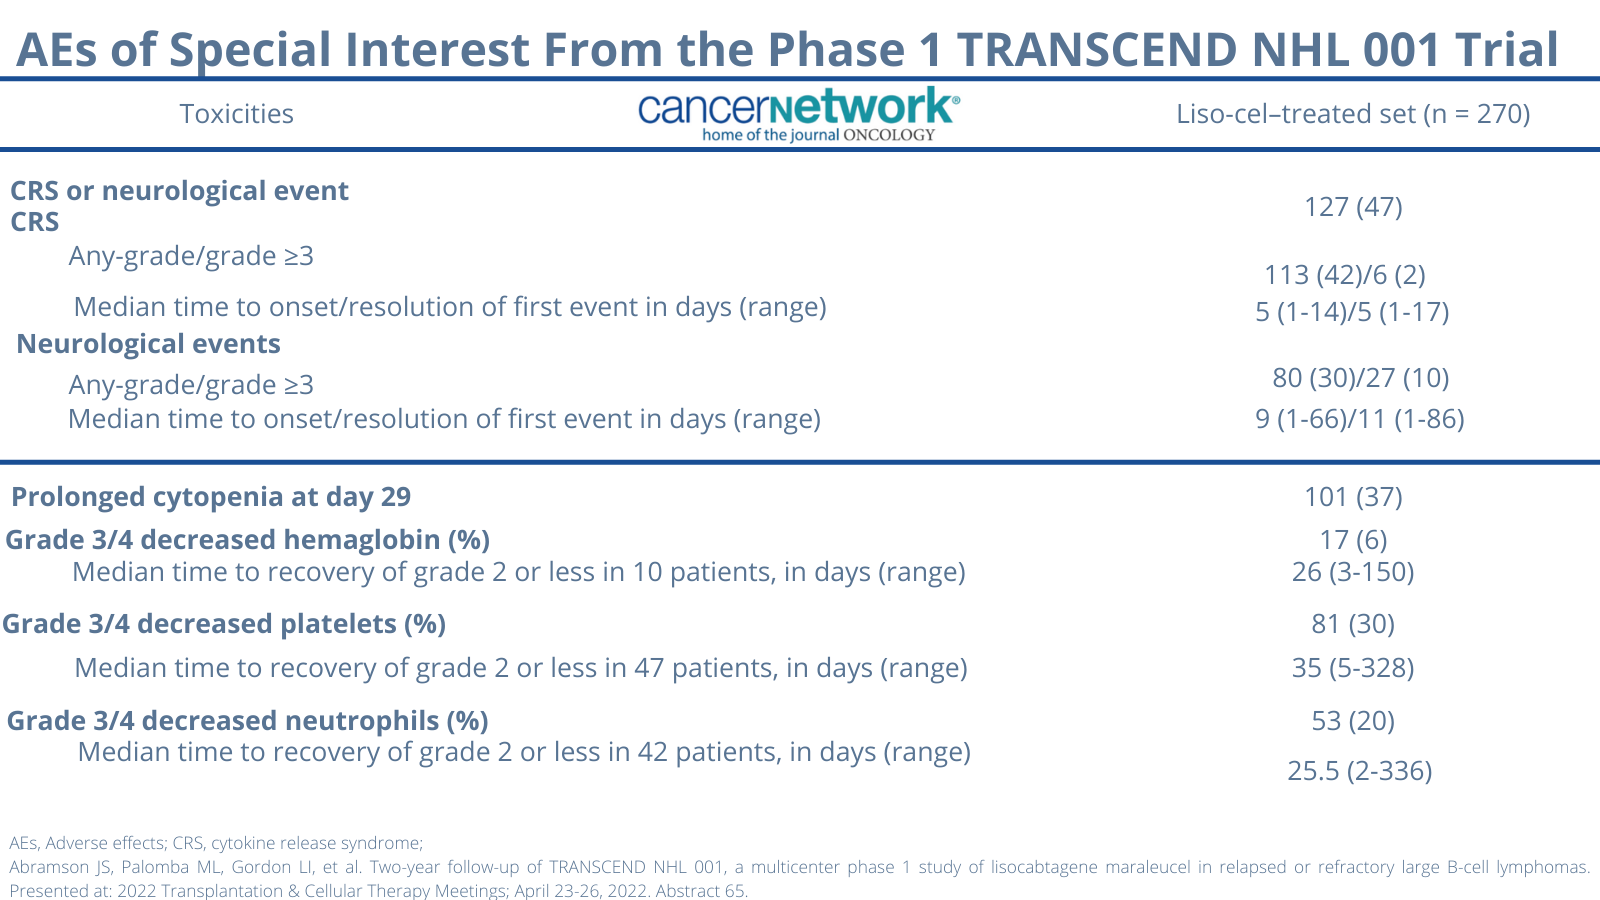 AEs of Special Interest From the Phase 1 TRANSCEND NHL 001 Trial  